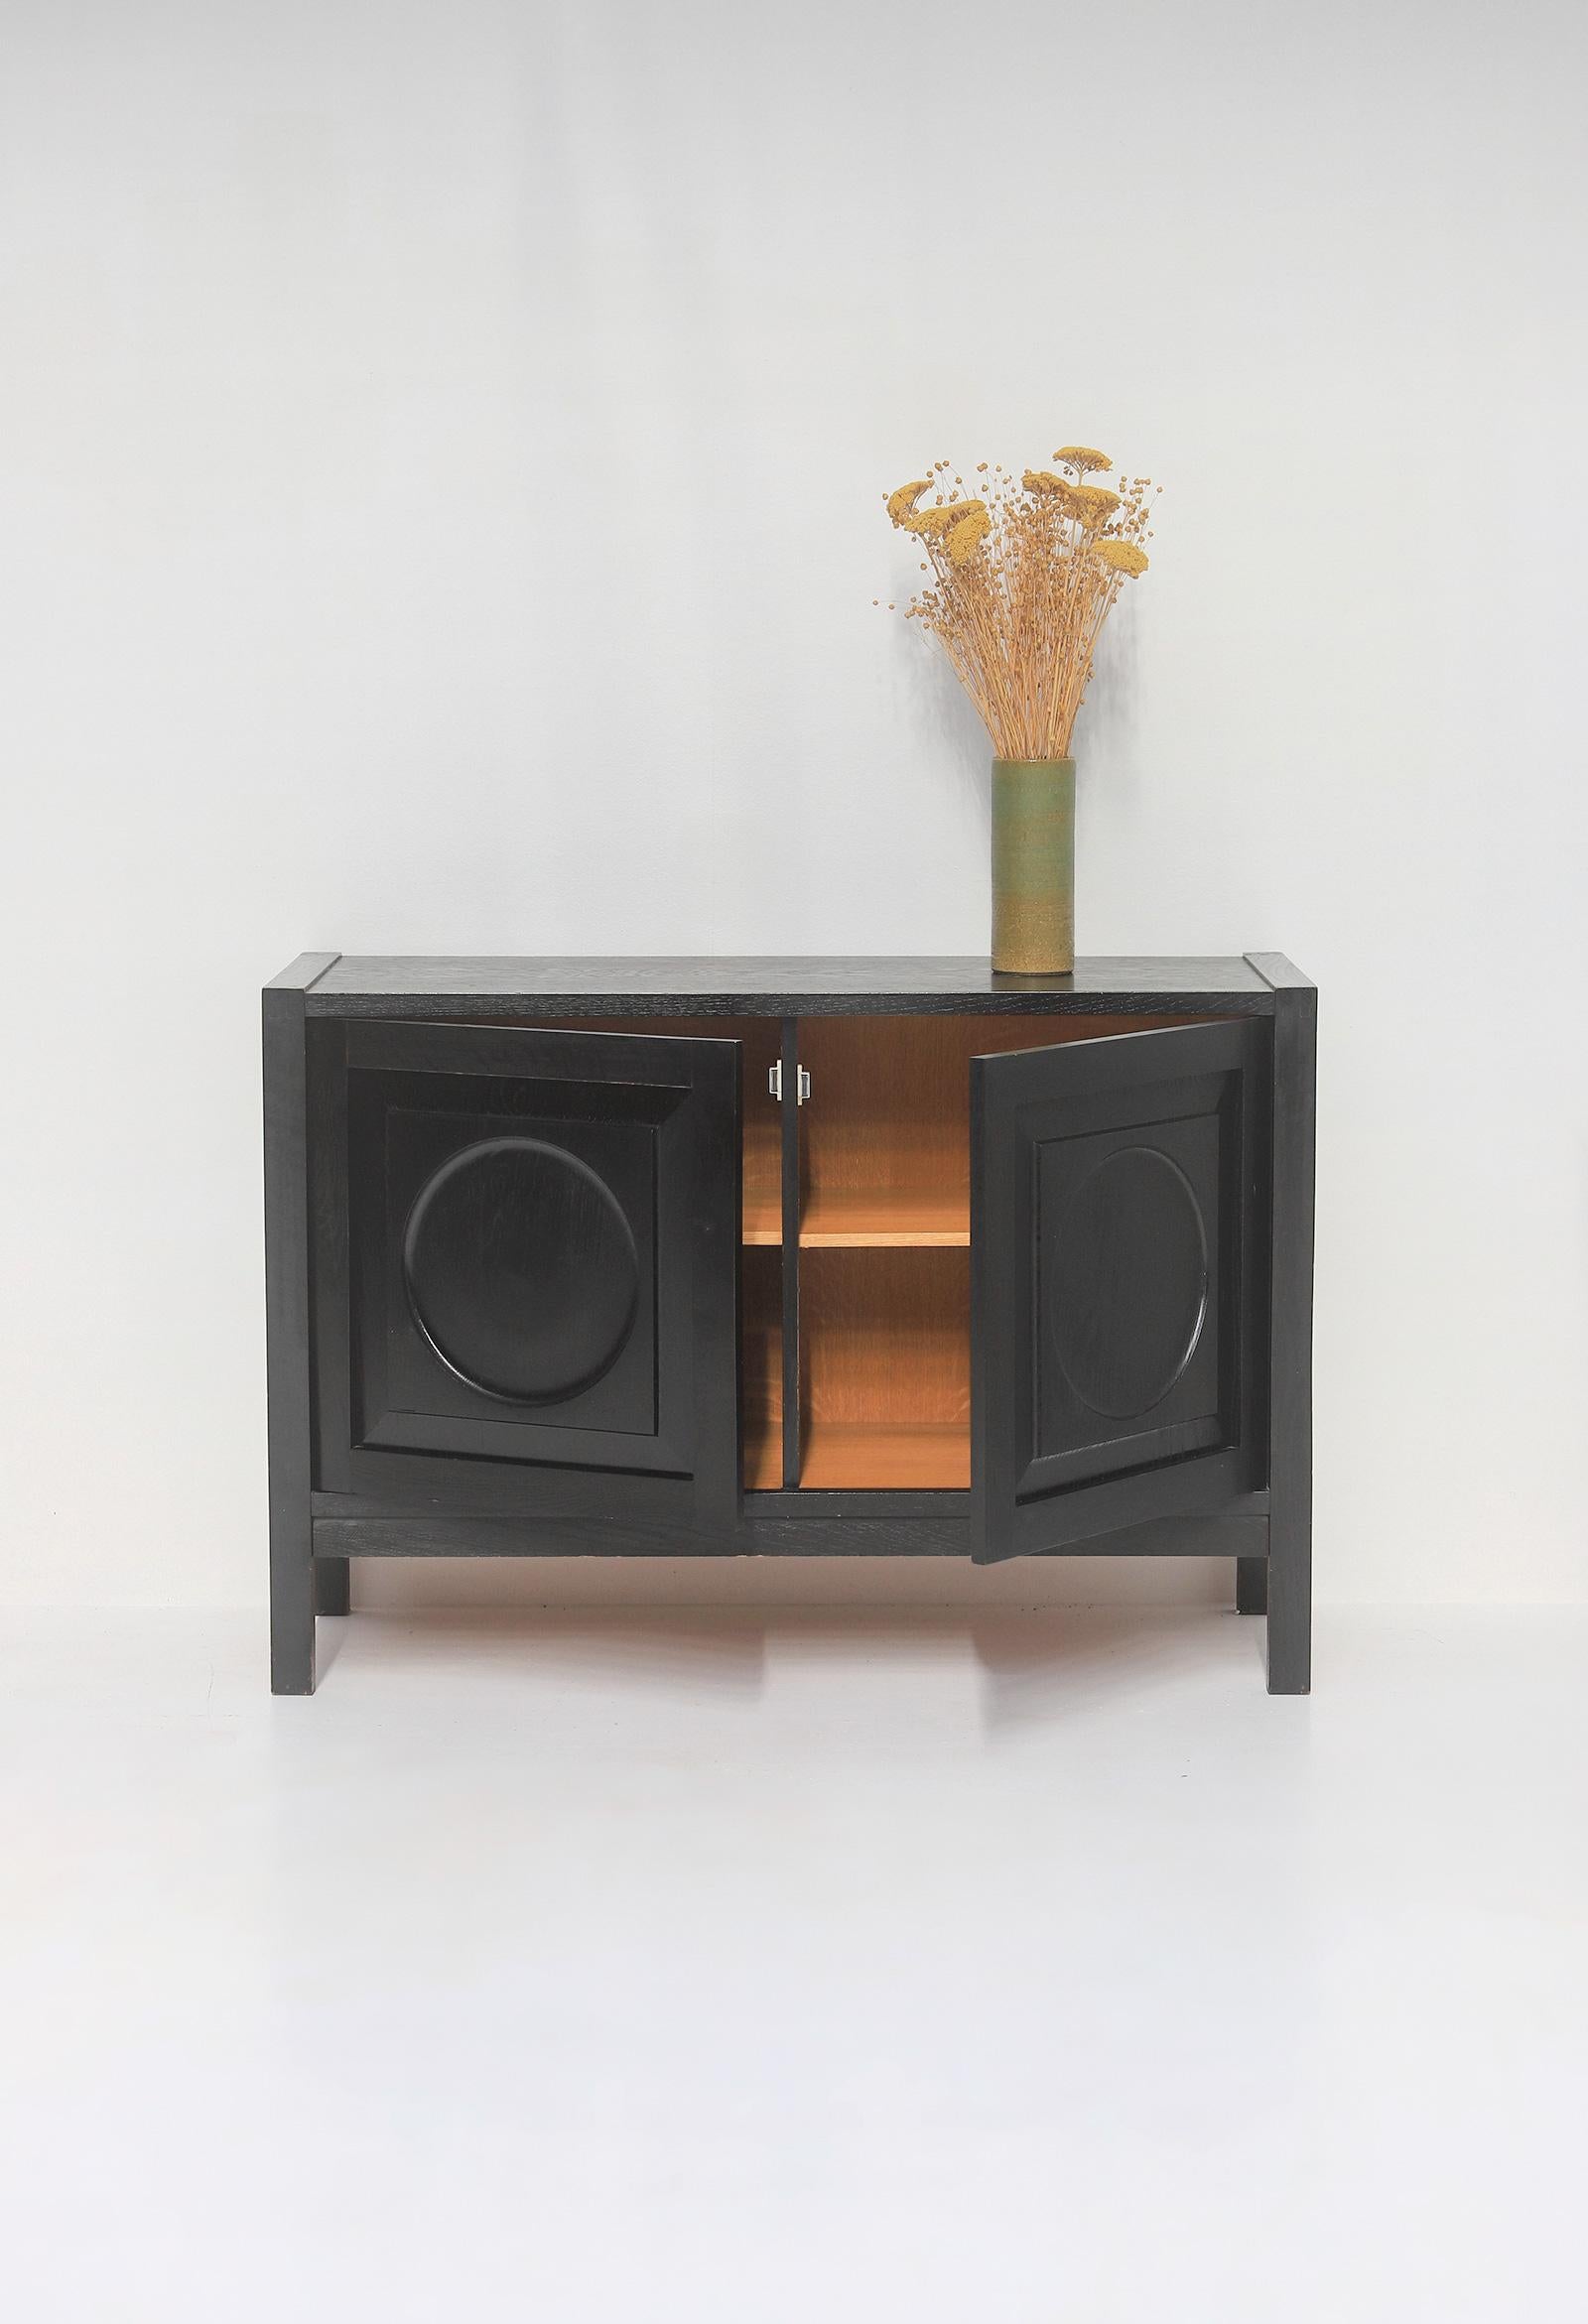 Late 20th Century Small Sideboard / Cabinet by Defour, Belgium 1970s